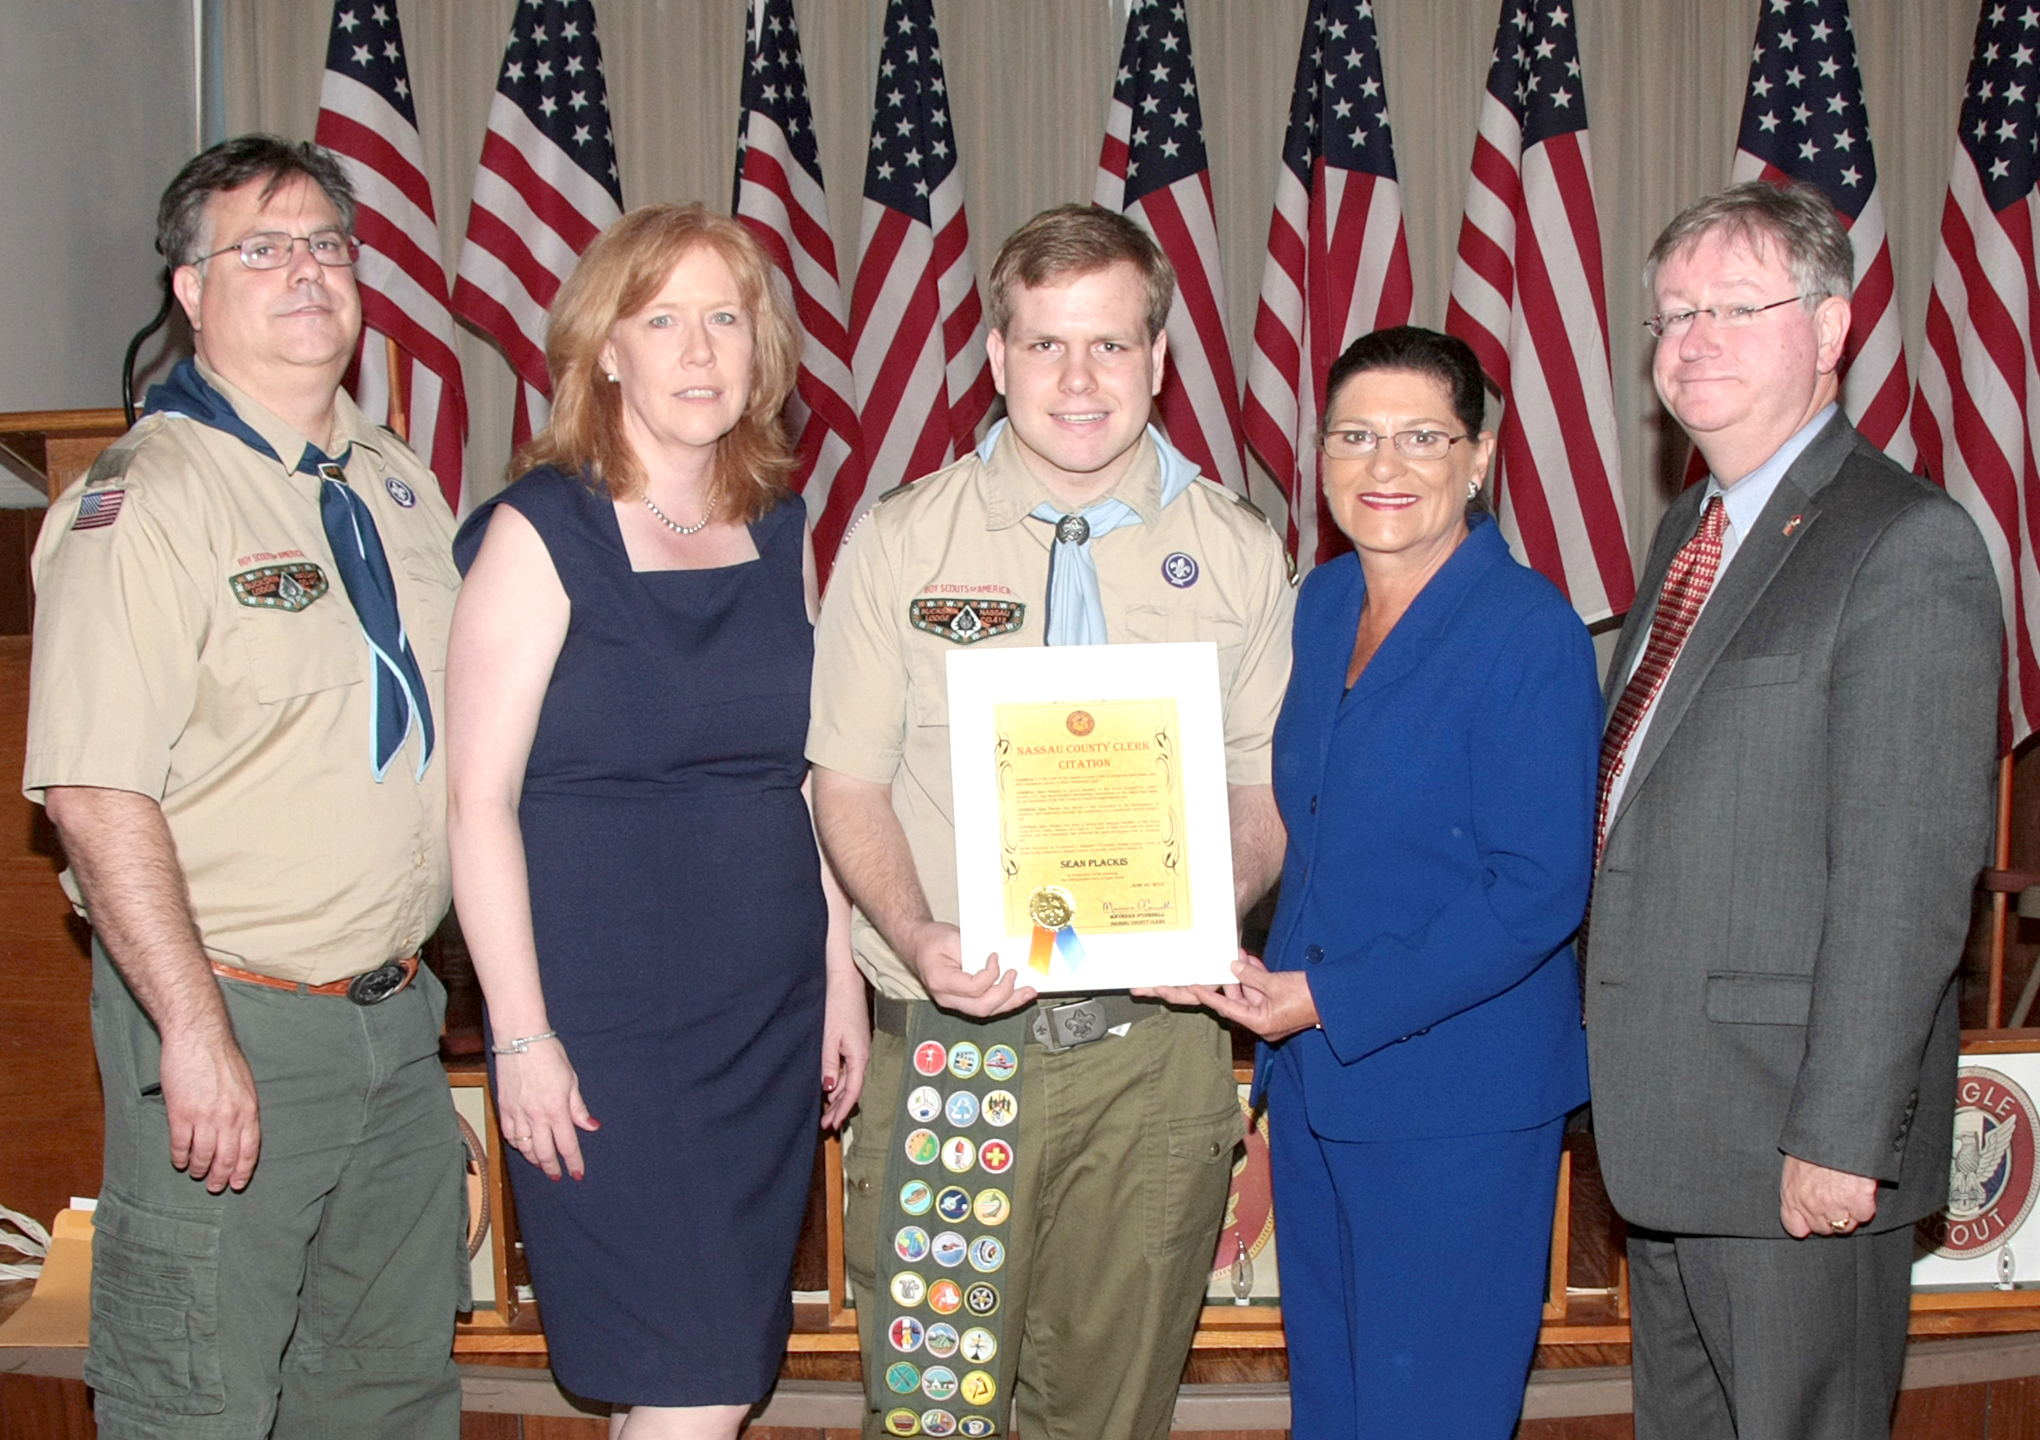 Nassau County Clerk Maureen OConnell joined Boy Scout Troop  116 of Valley Stream at their Eagle Scout Court of Honor Ceremony for Sean Plackis